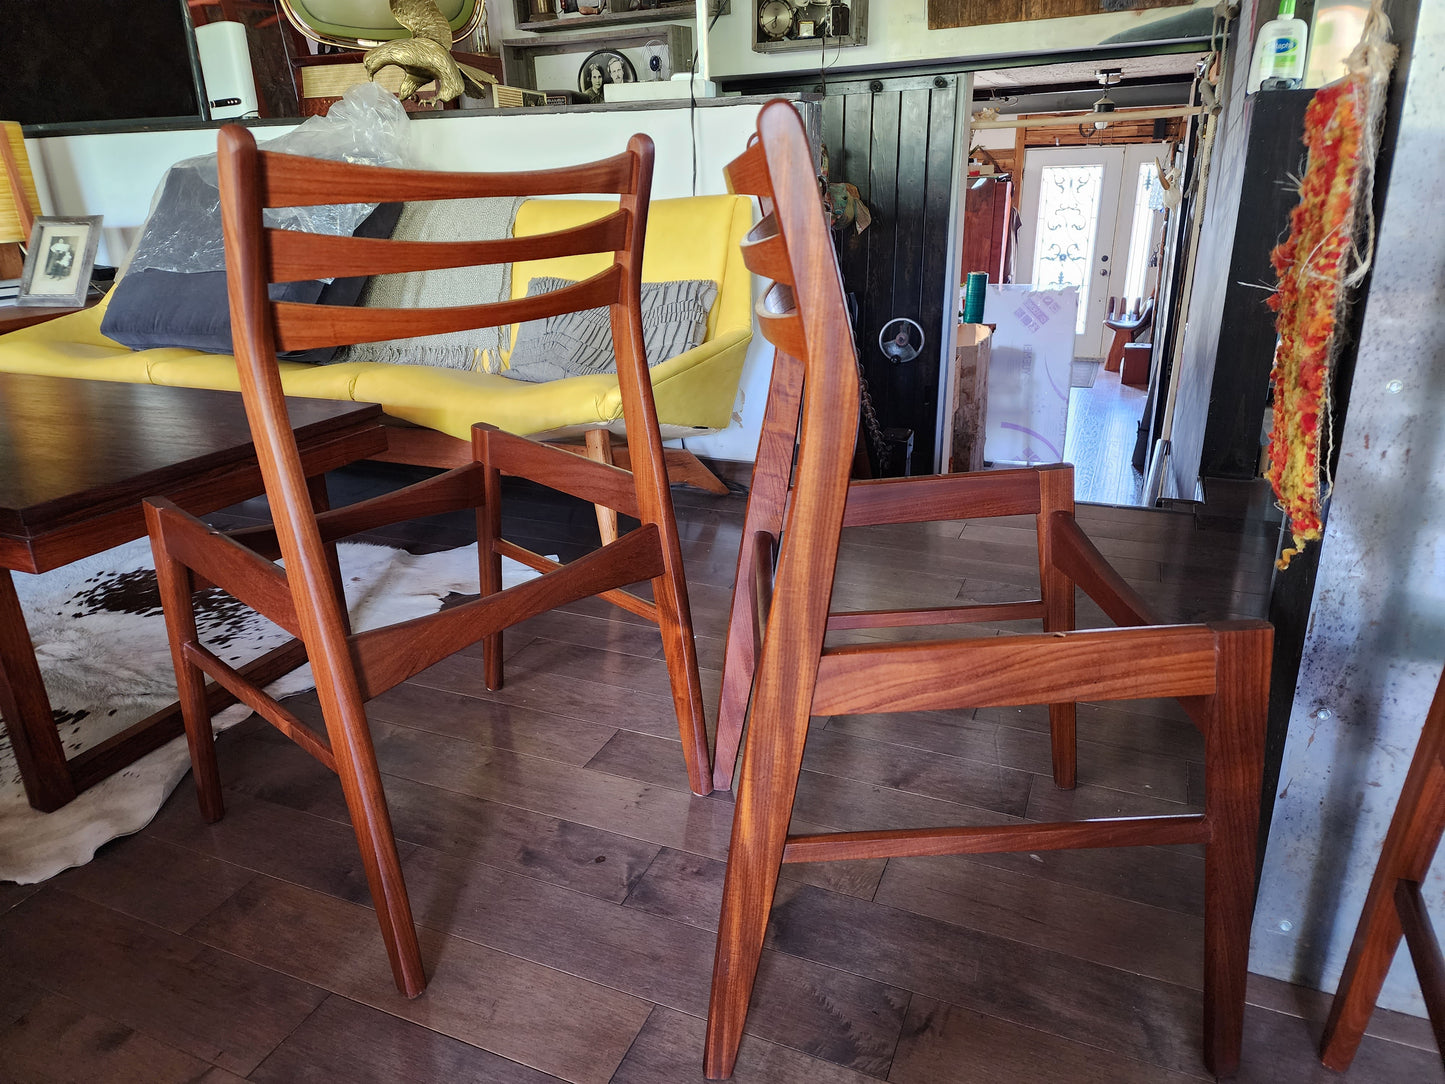 6 REFINISHED will be REUPHOLSTERED Danish Mid Century Modern Teak Chairs Ladder Back